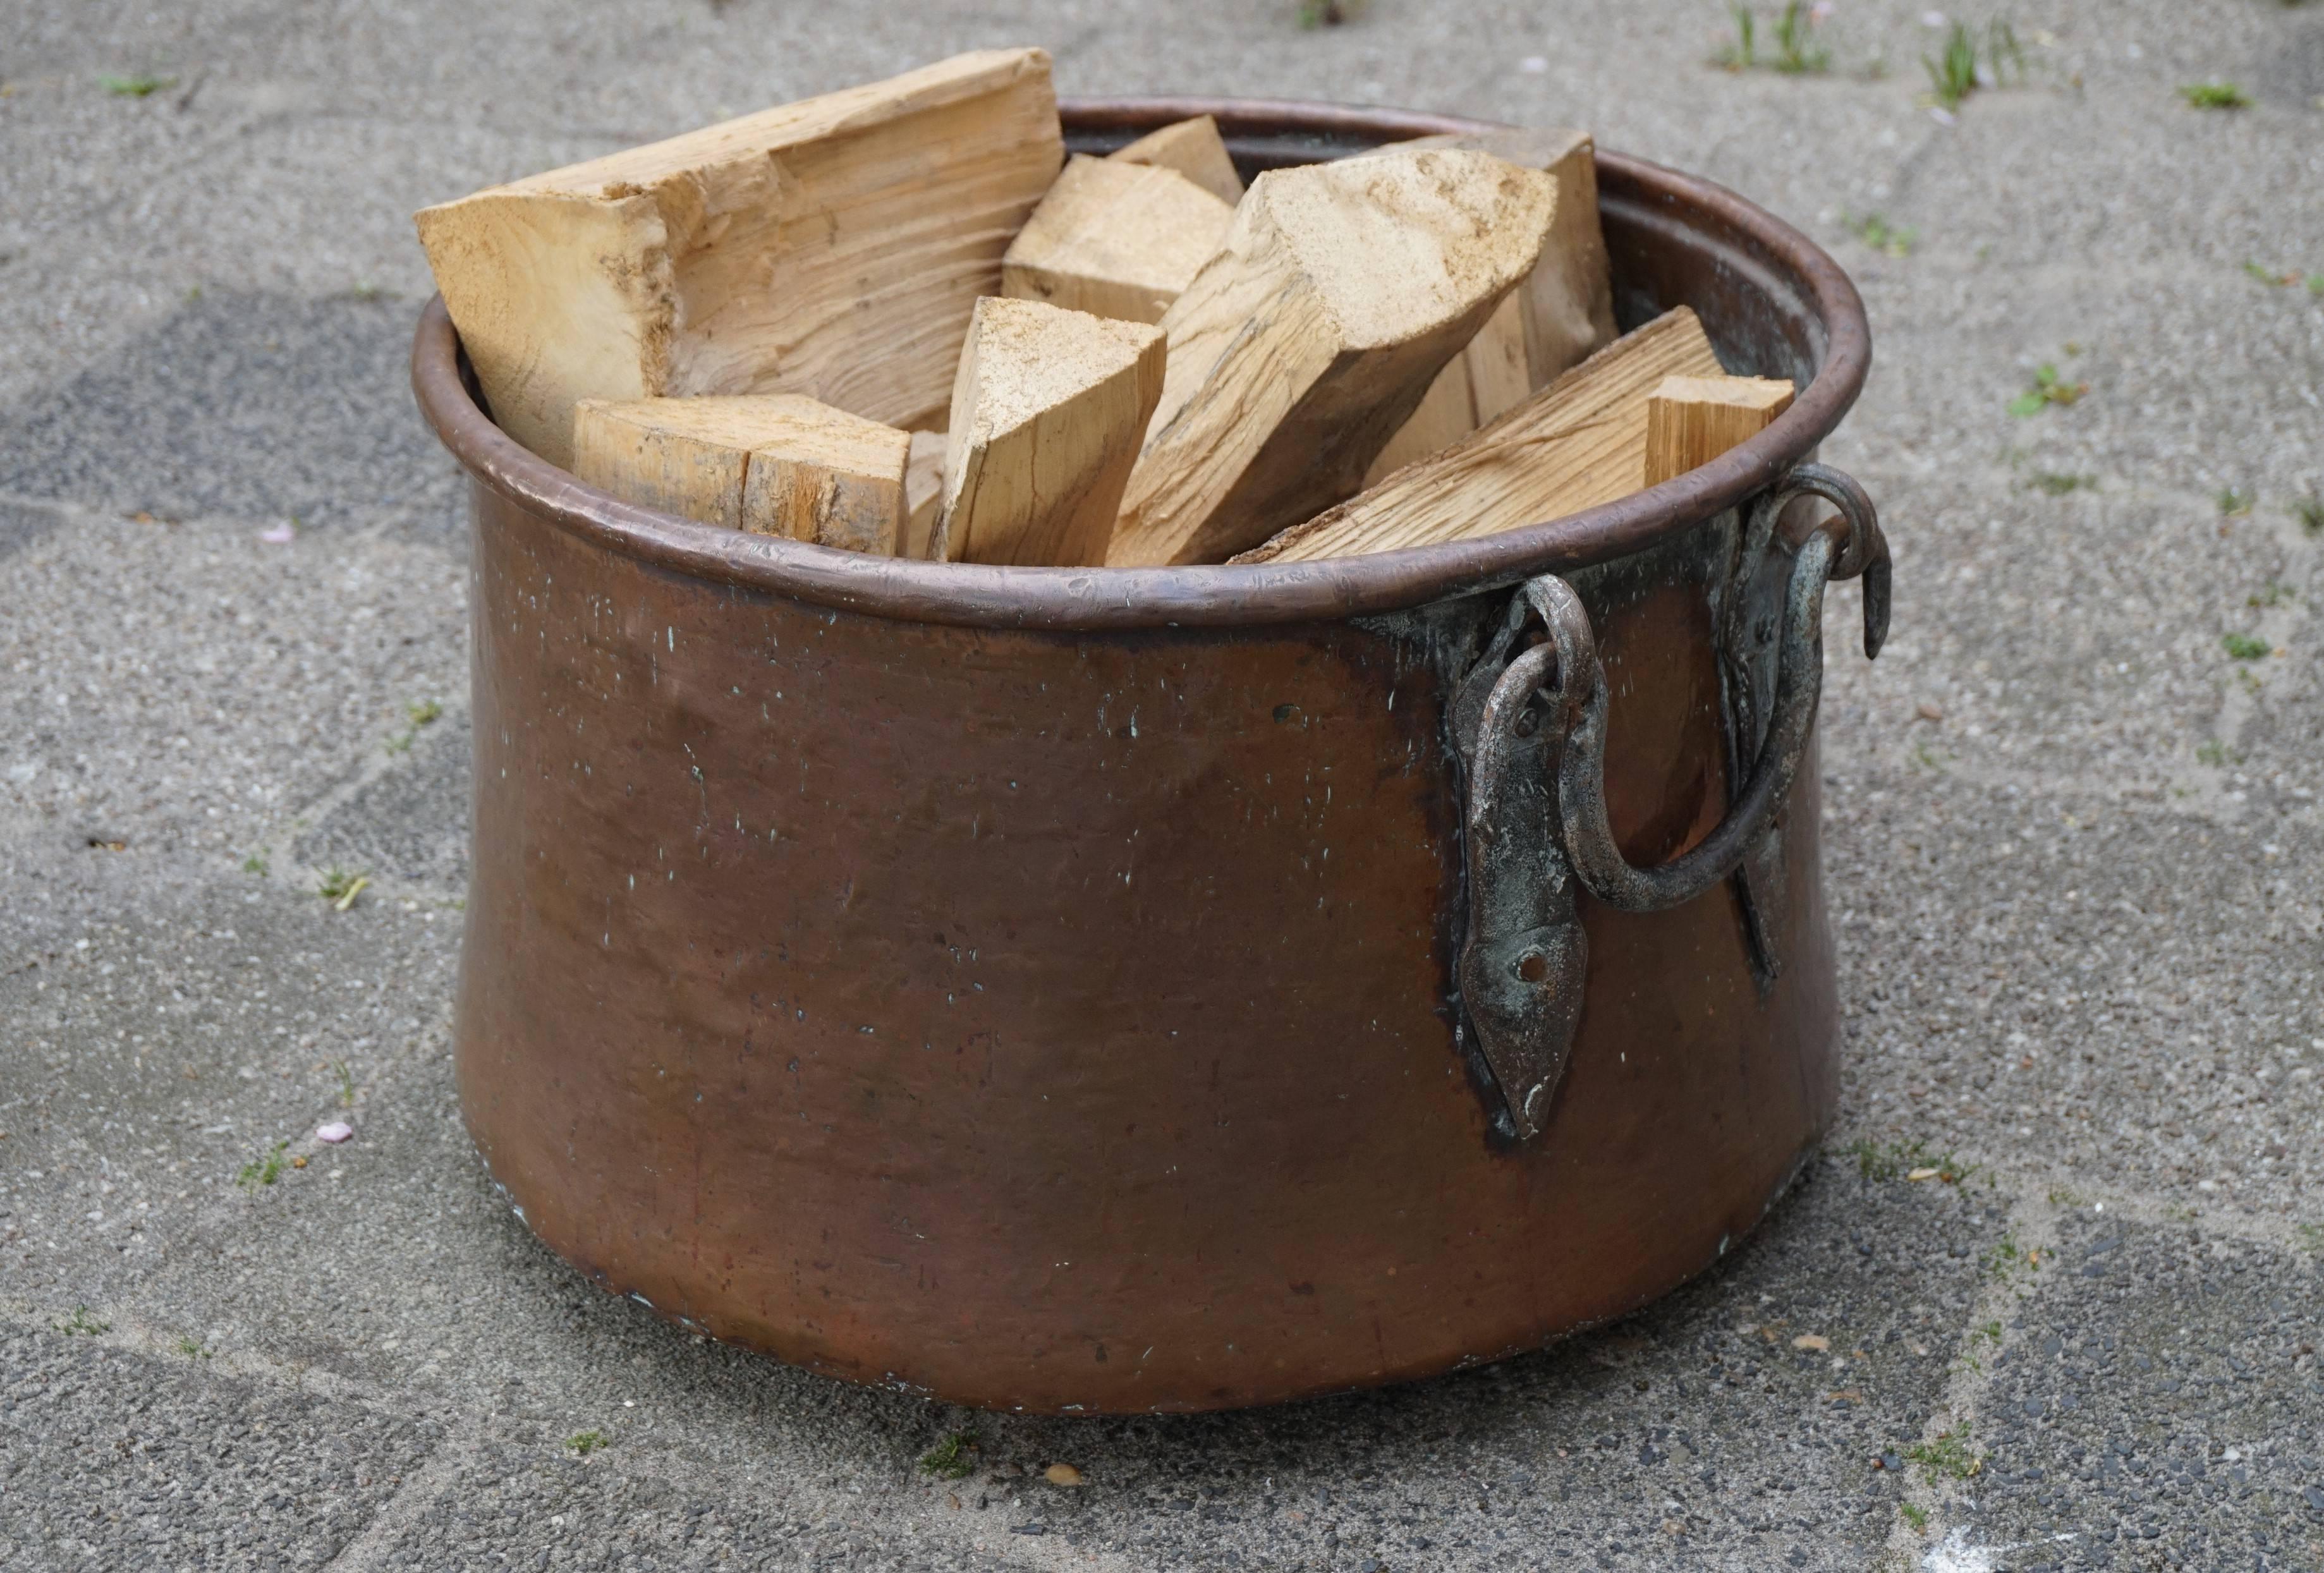 Early 1800s and highly stylish bucket.

Only if you were a very wealthy person in Holland in the early 1800s, would you be able to afford such a large, impressive and all-handcrafted bucket. This stunning and tactile antique would be placed on or